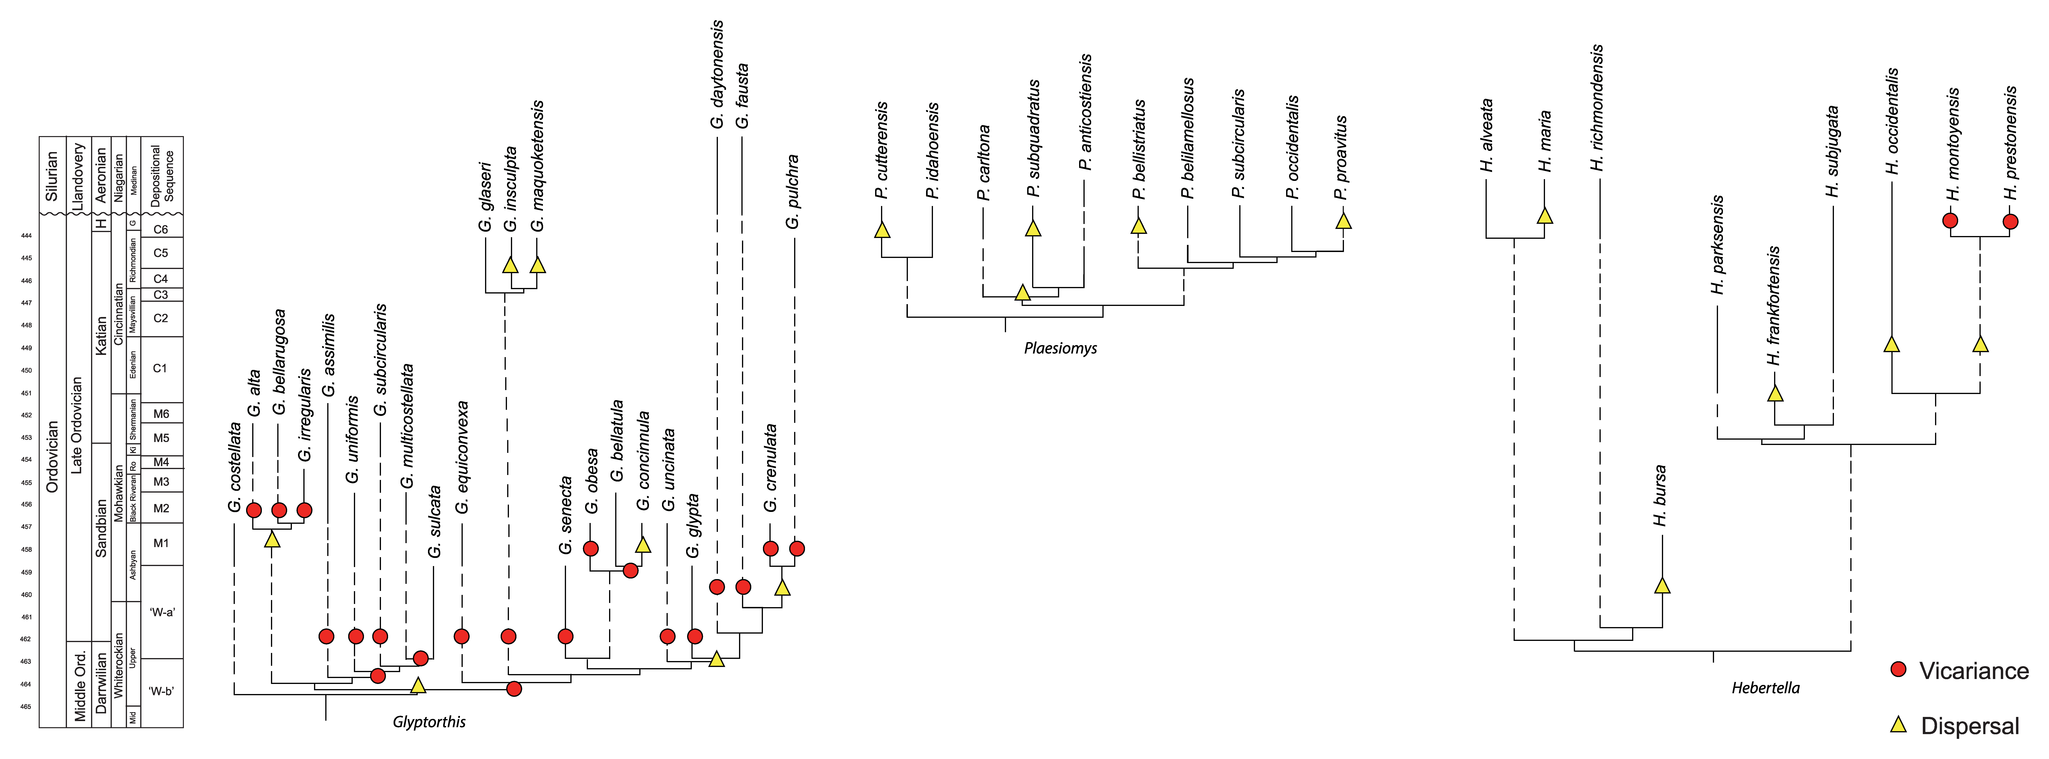 Image shows examples of cladograms scaled to time and including extinct taxa as terminals. 